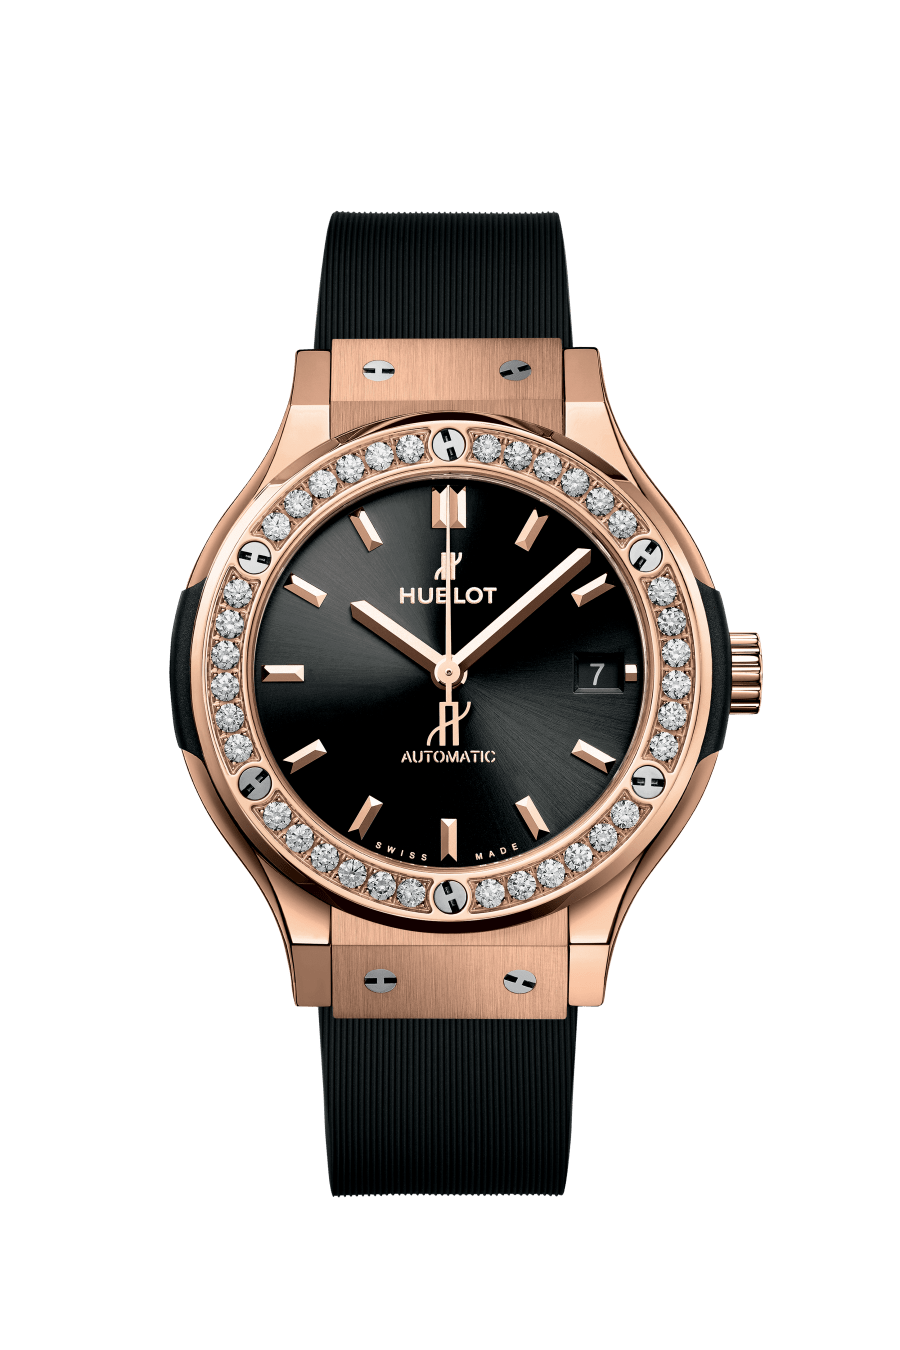 Hublot Classic Fusion in Rose Gold with Diamond Bezel 38mm